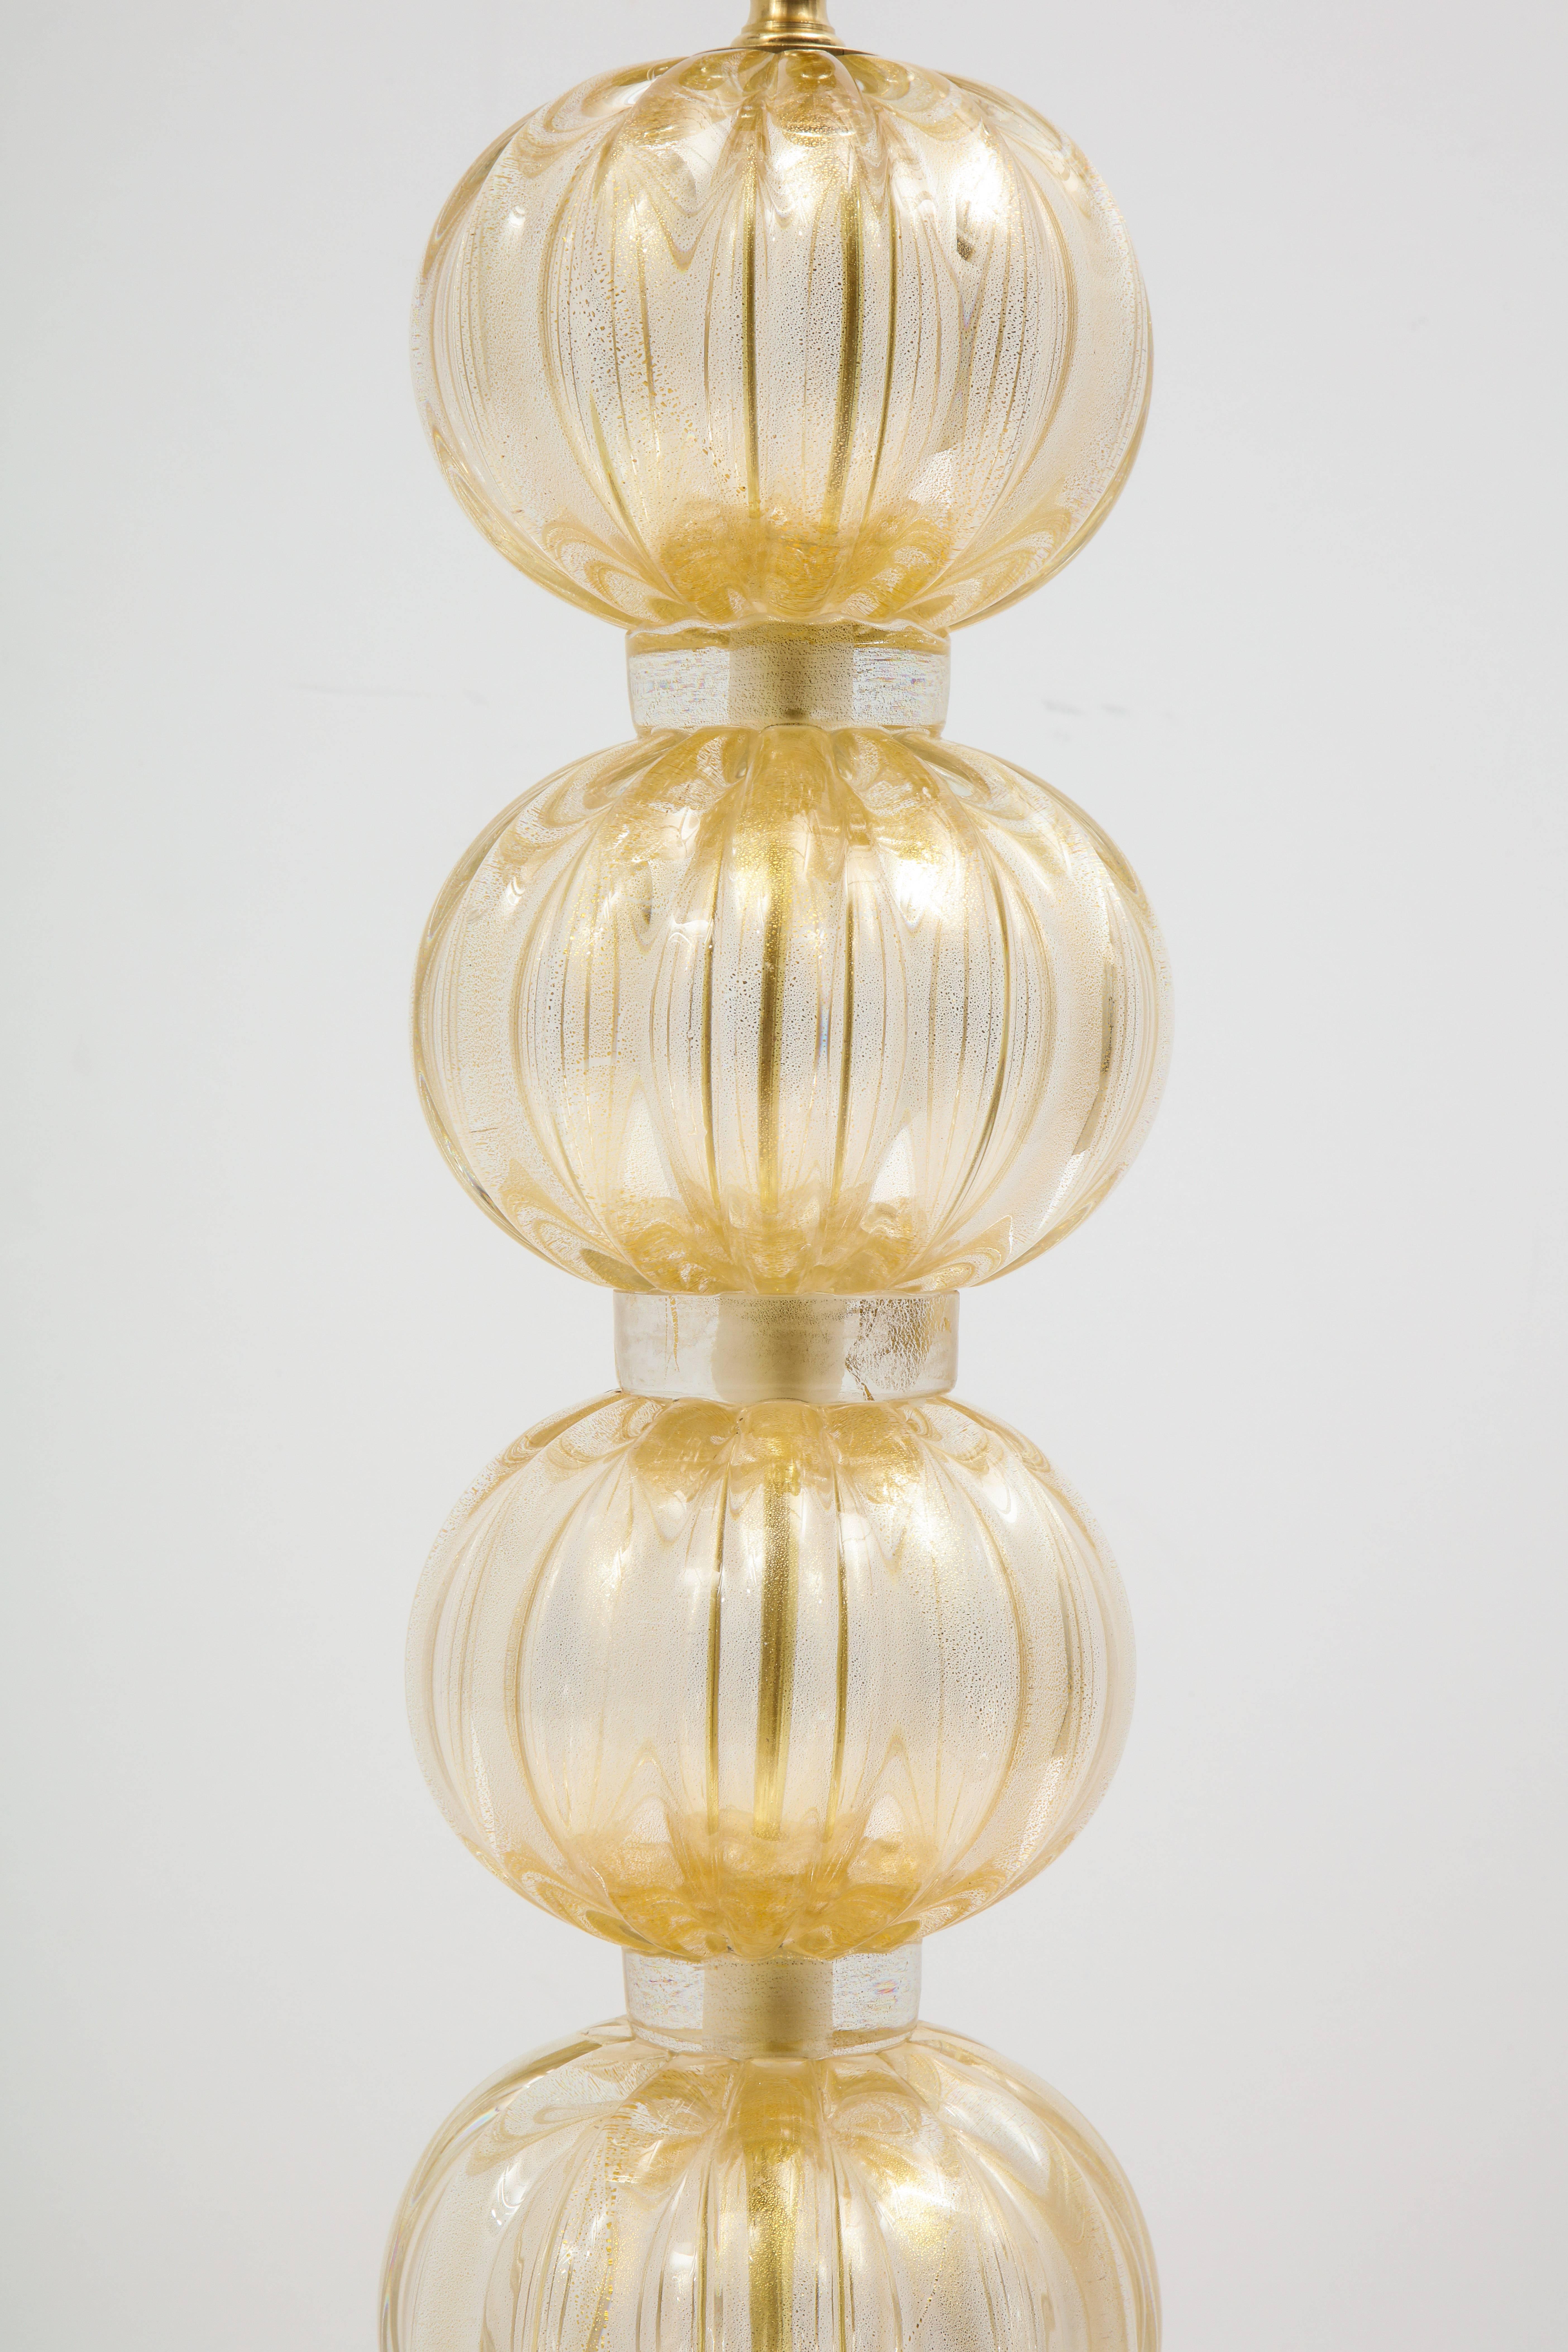 Contemporary Magnificent Pair of Italian Murano Glass Lamps in 23-Karat Gold